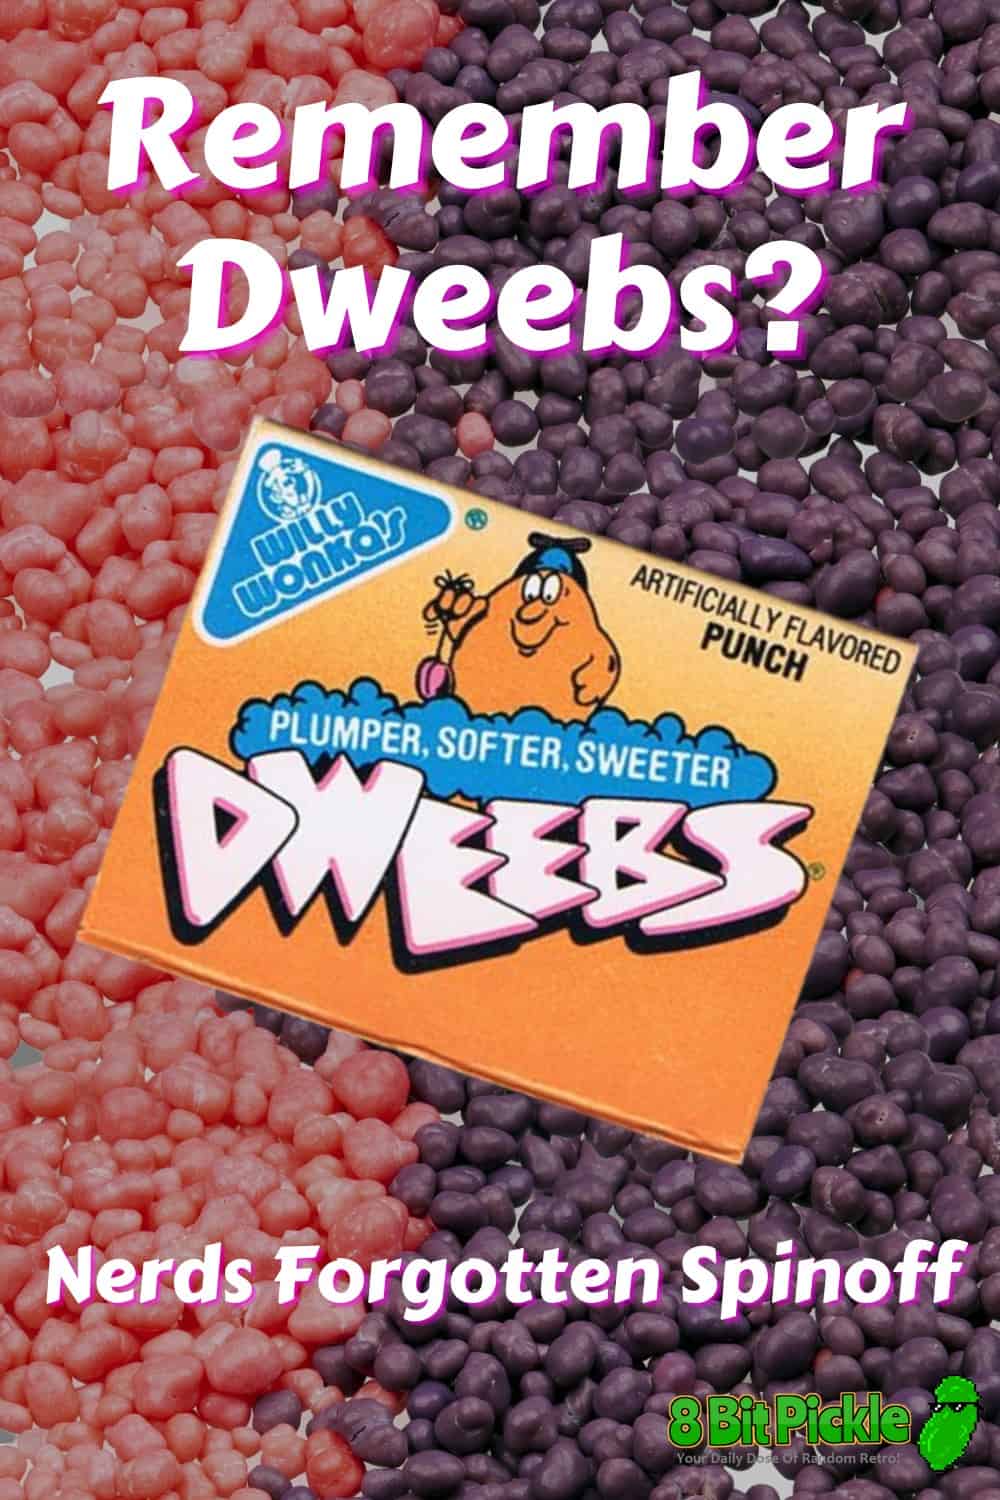 Remember Dweebs candy from the 90s?